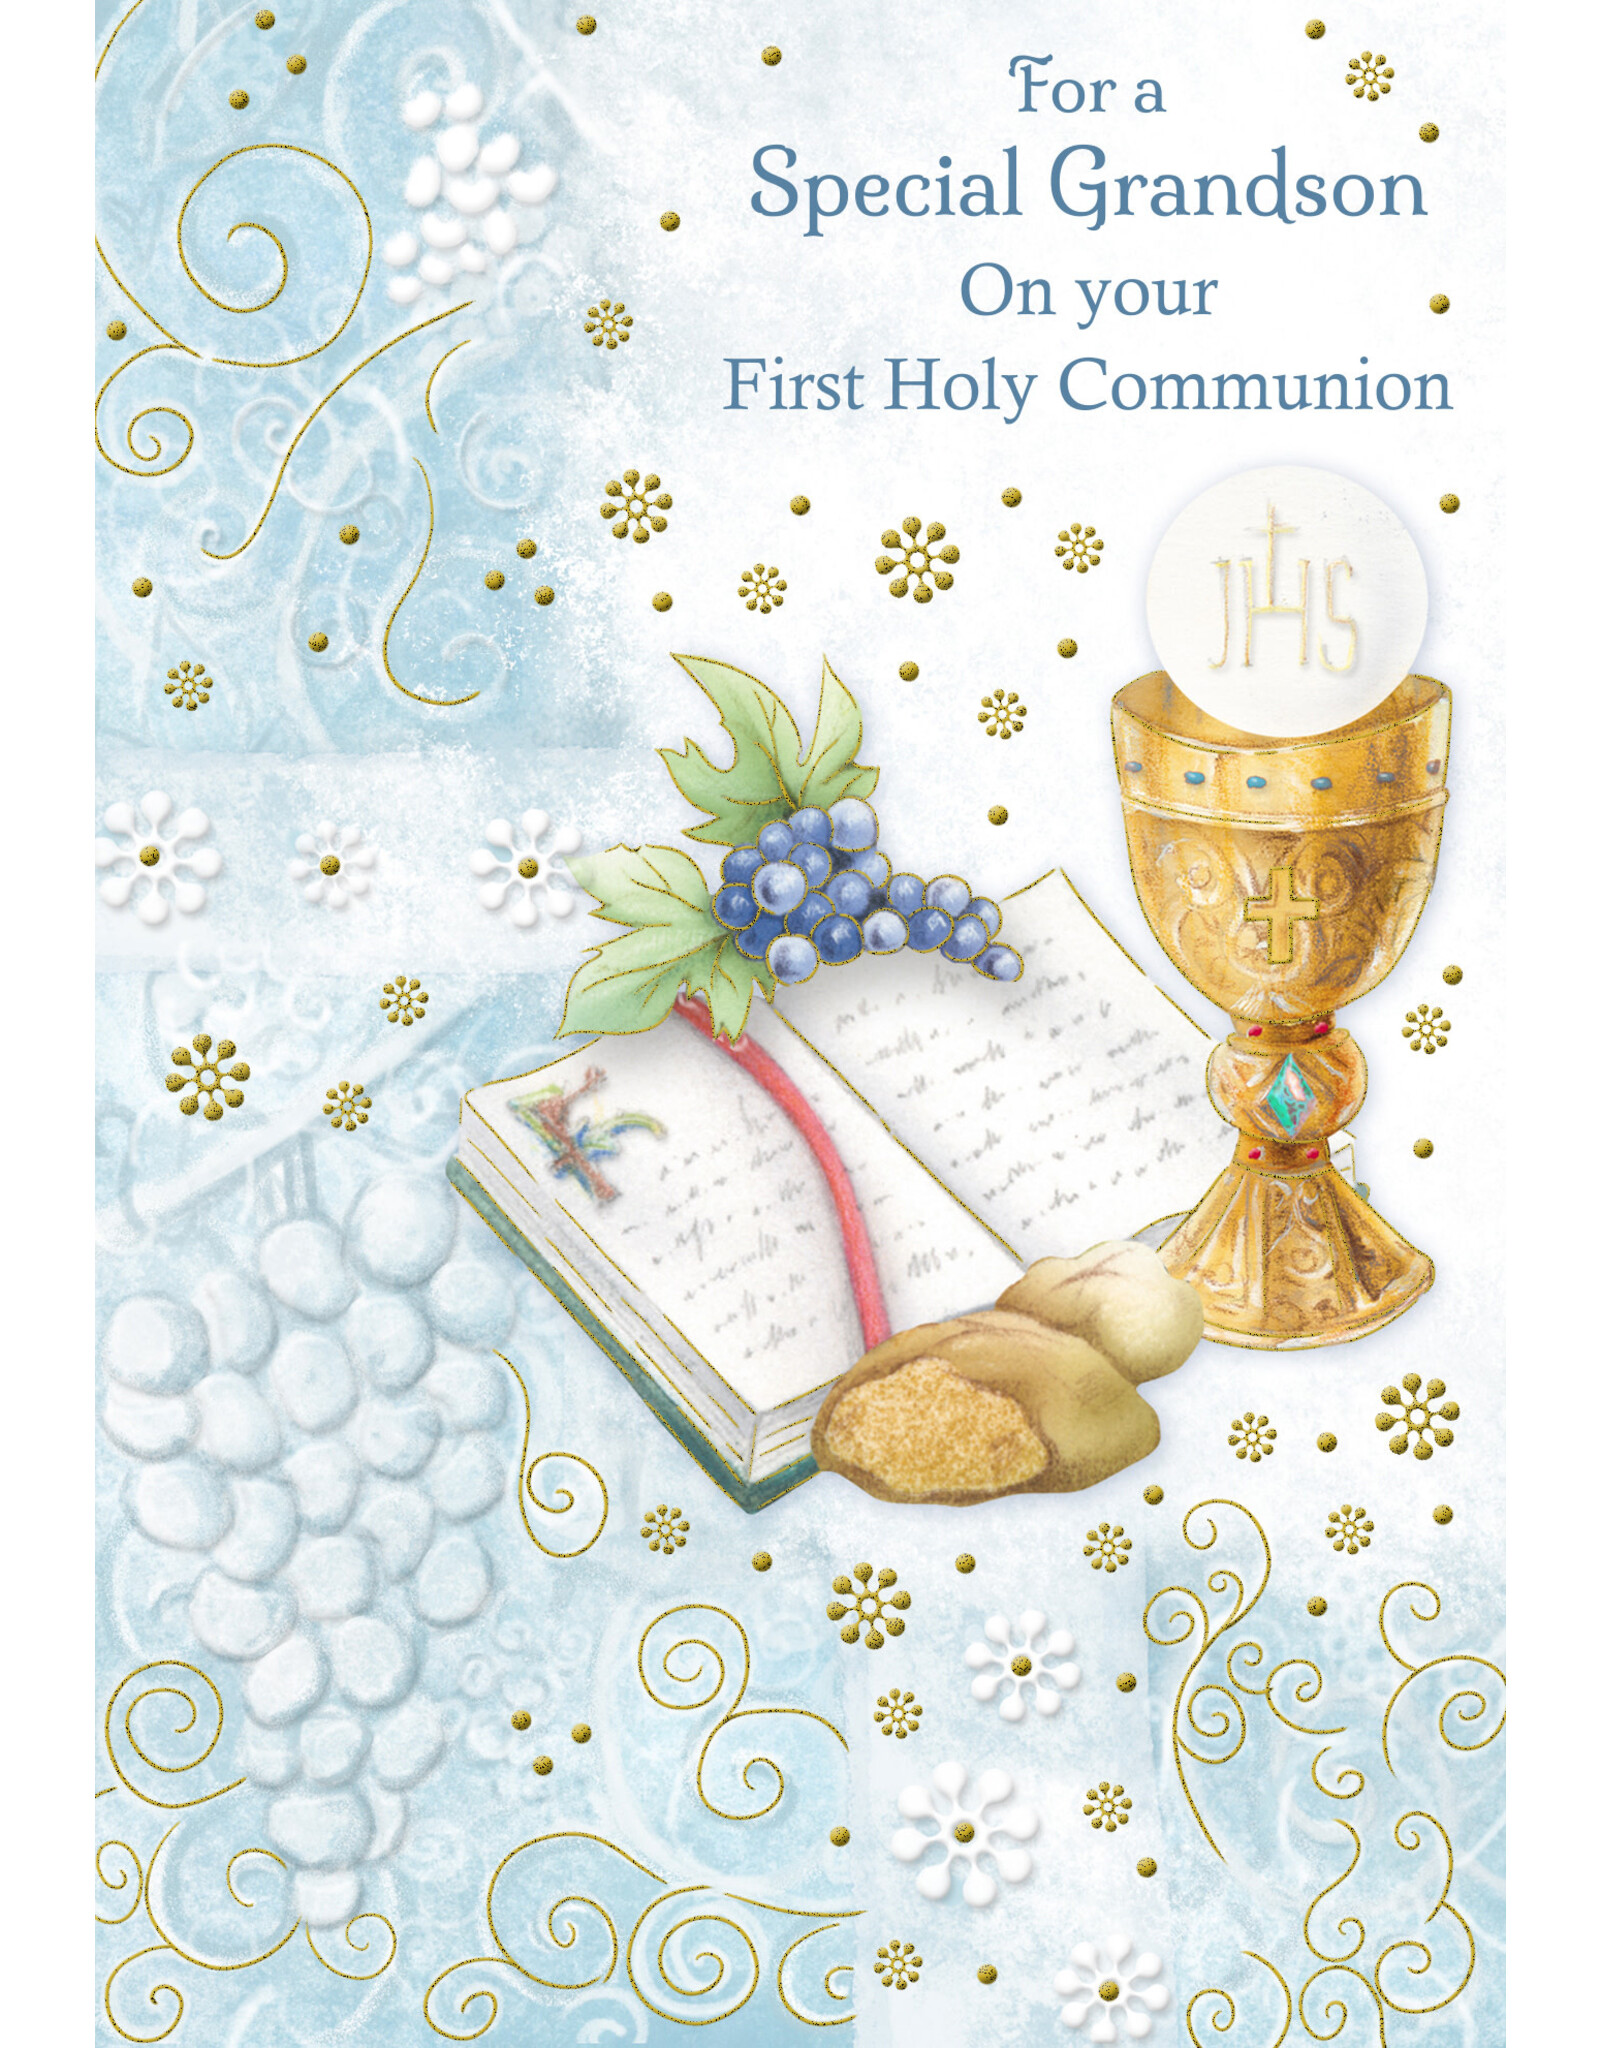 Greetings of Faith Card - First Communion (Grandson), Special Grandson